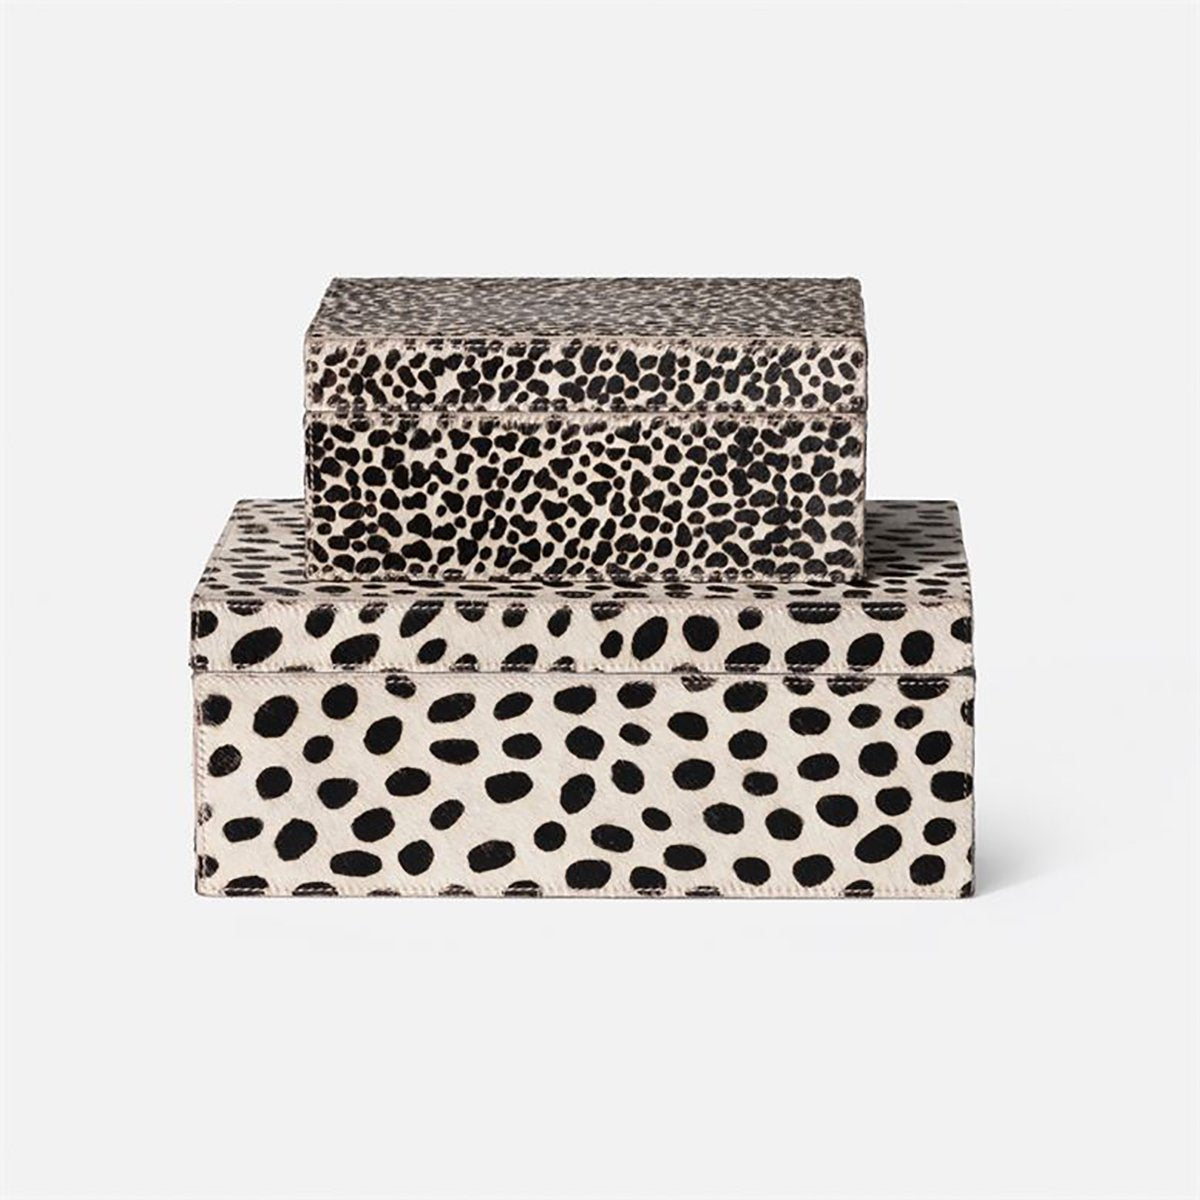 Made Goods Bryce Mixed Print Hair-On-Hide Box, 2-Piece Set